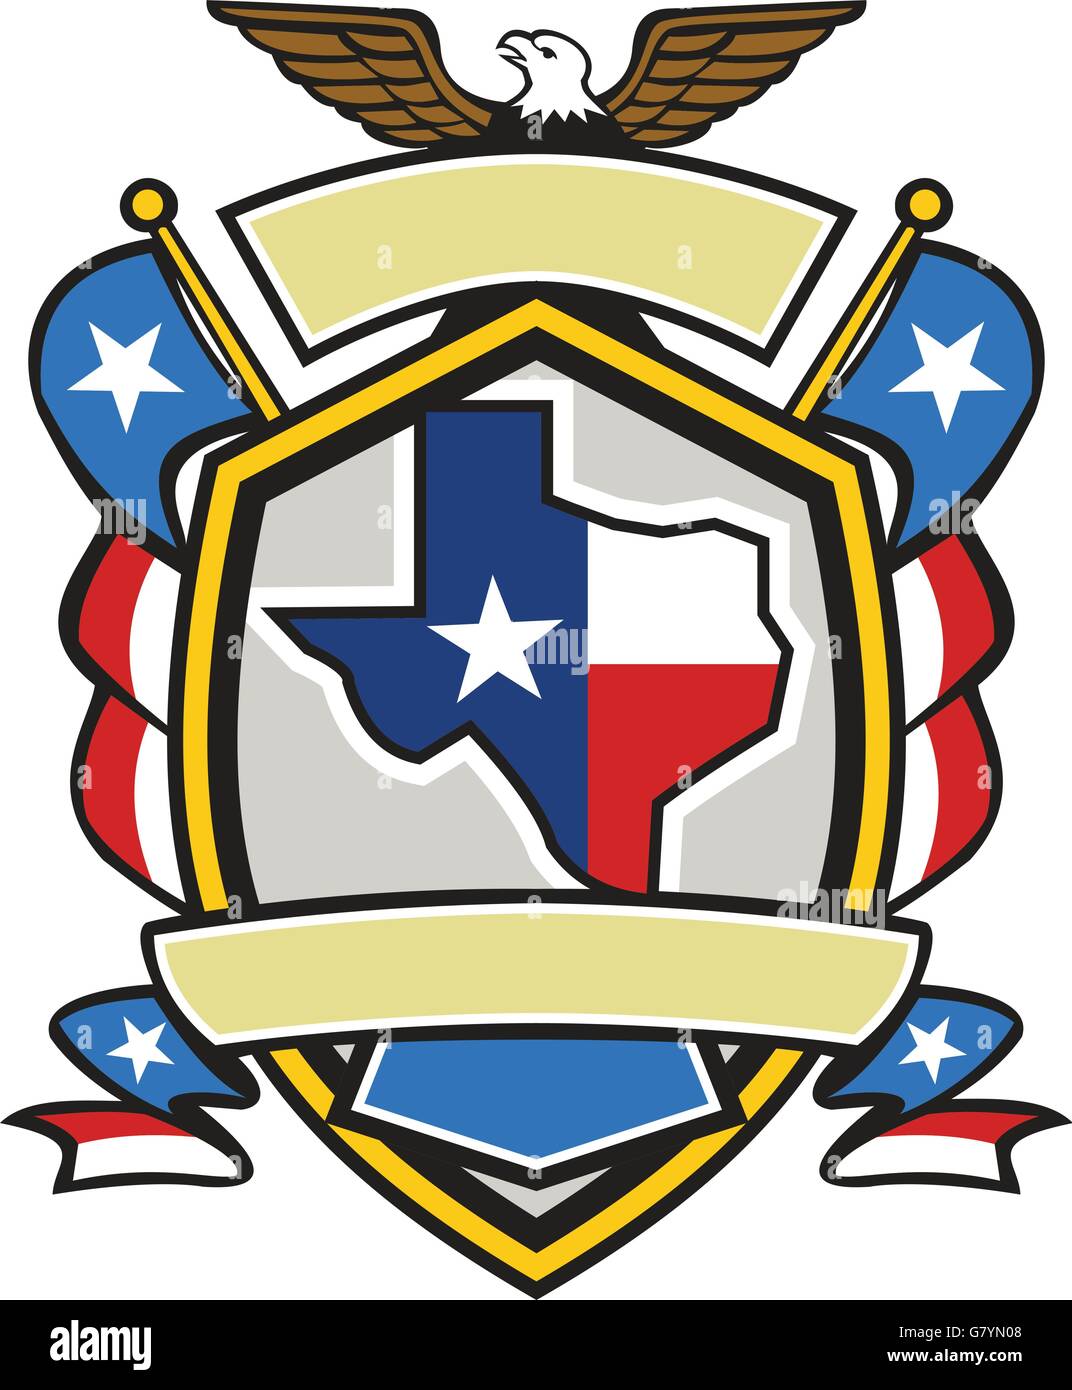 Illustration of coat of arms style emblem of Texas state map draped in its  state flag with american eagle up on top and unfurled Texan lone star flags  on side set inside